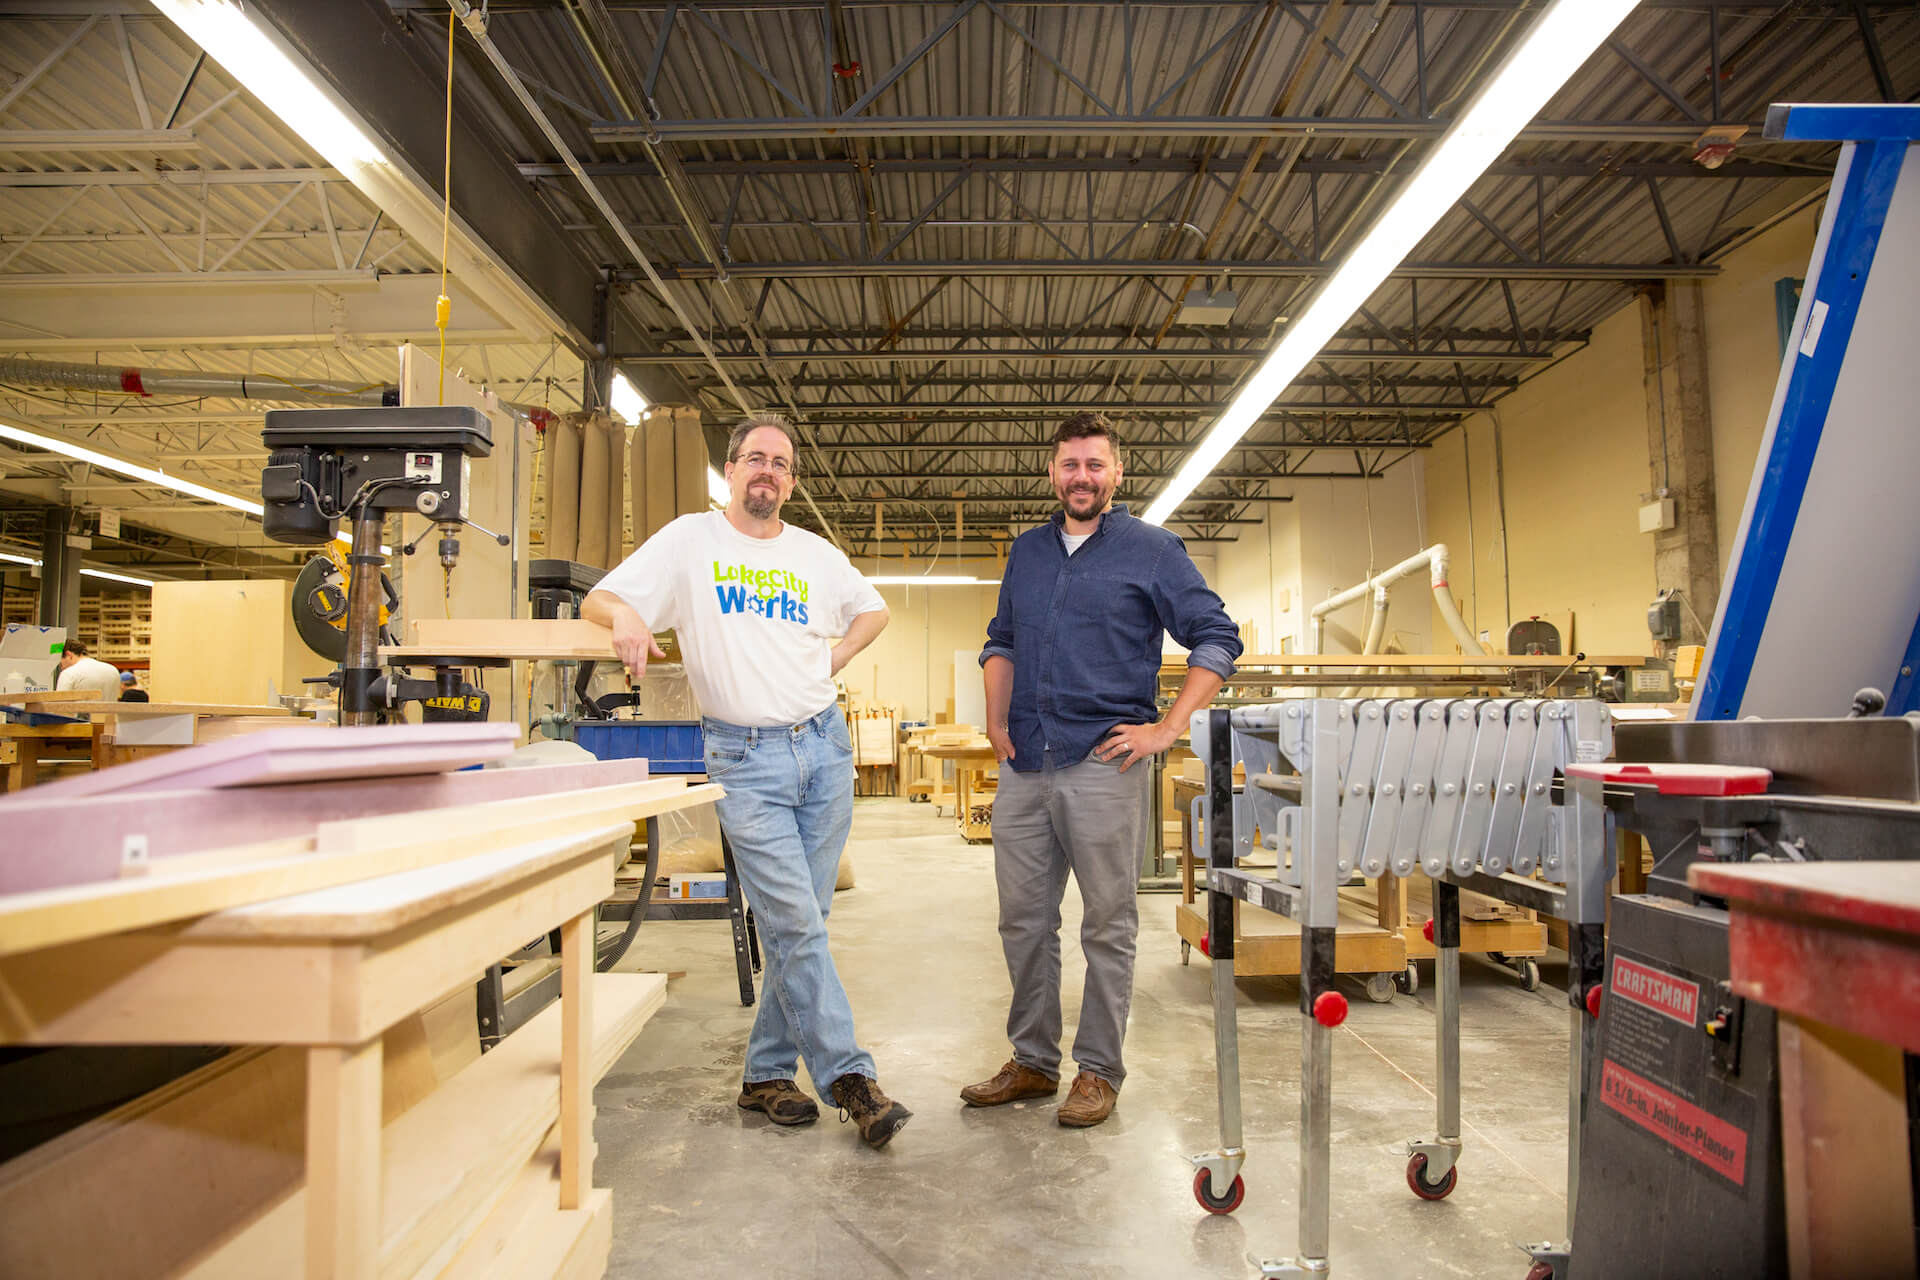 Photo of George Parsons and owner of Lake City Woodworkers standing together in the wood shop